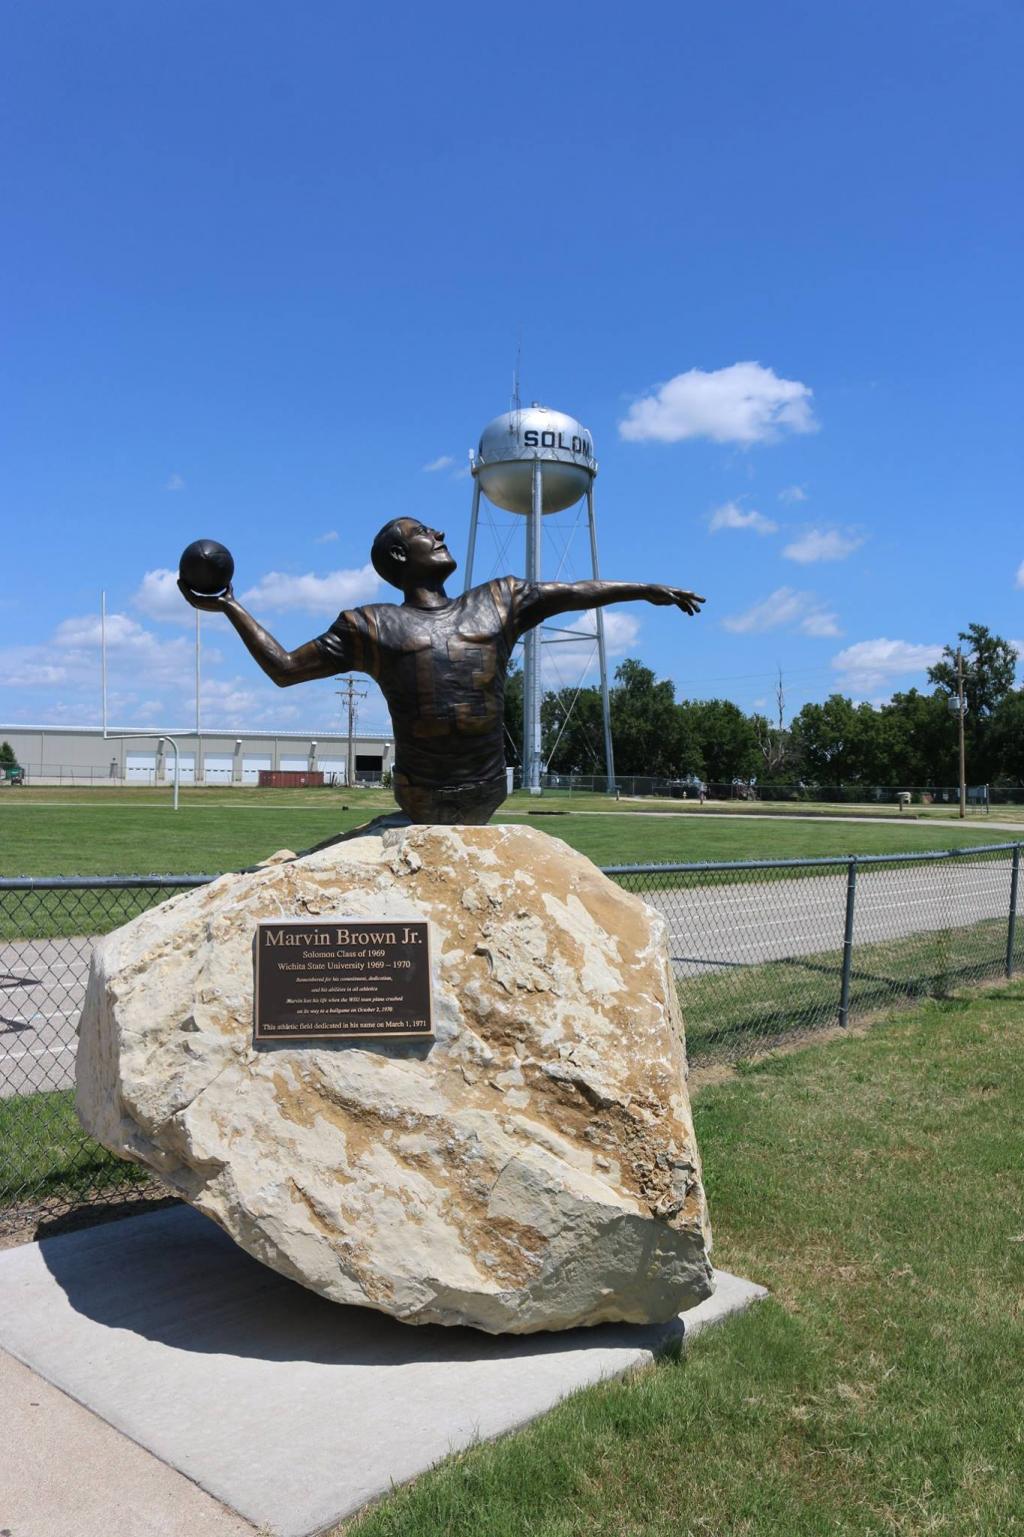 A photo of a statue of a man throwing a football